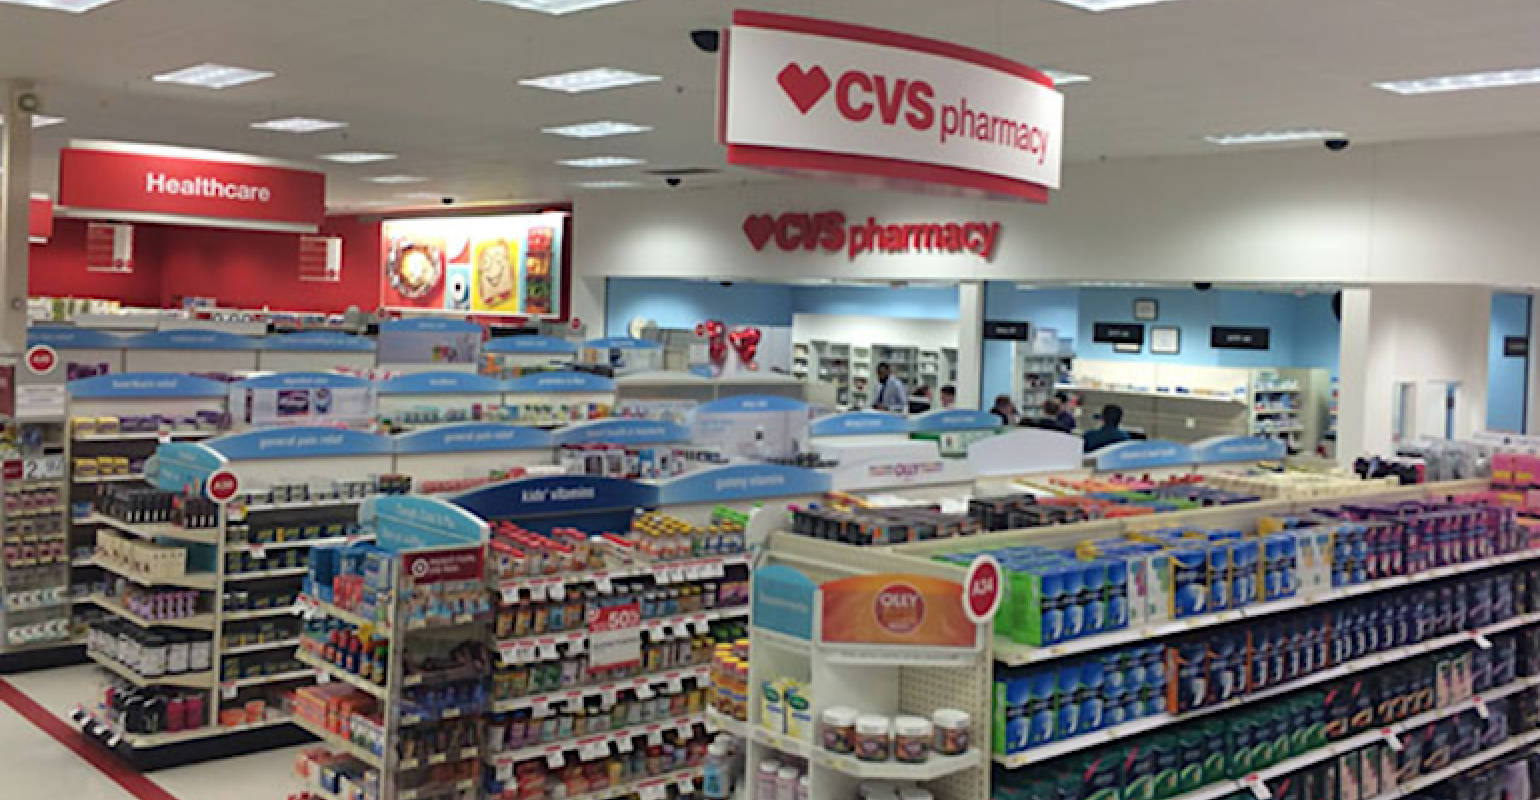 Healthcare Products At Cvs Pharmacy Wallpaper